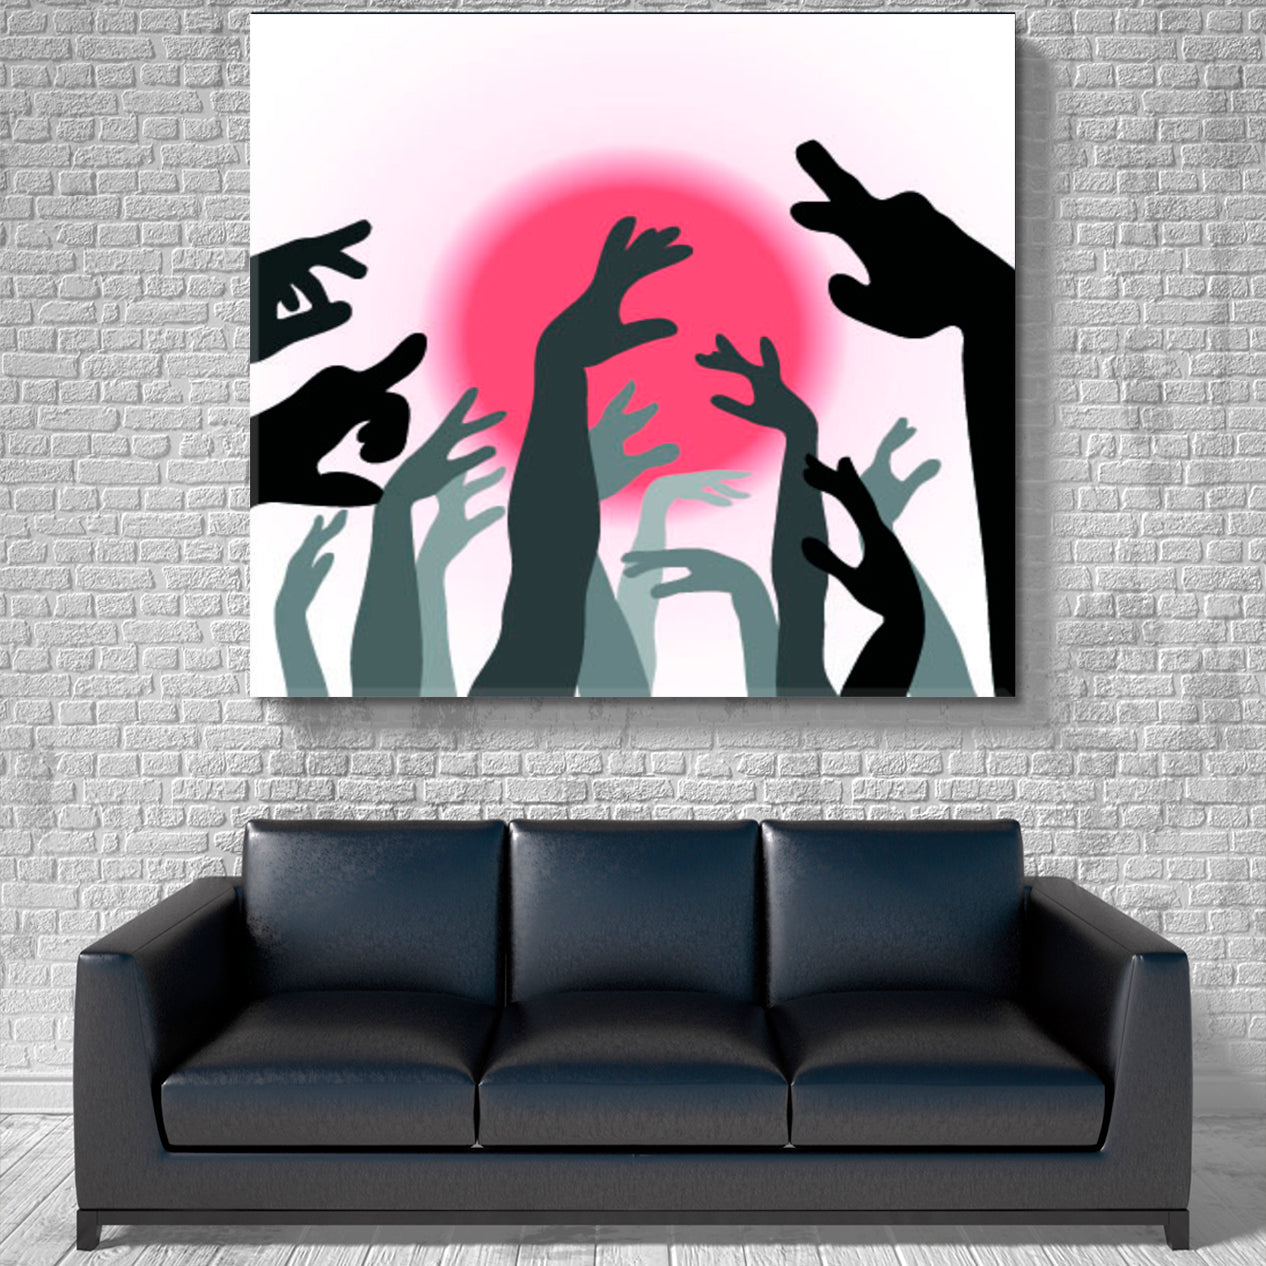 HANDS UP Hands and Sun Silhouette Poster Posters, Flags Giclee Print Artesty 1 Panel 12"x12" 